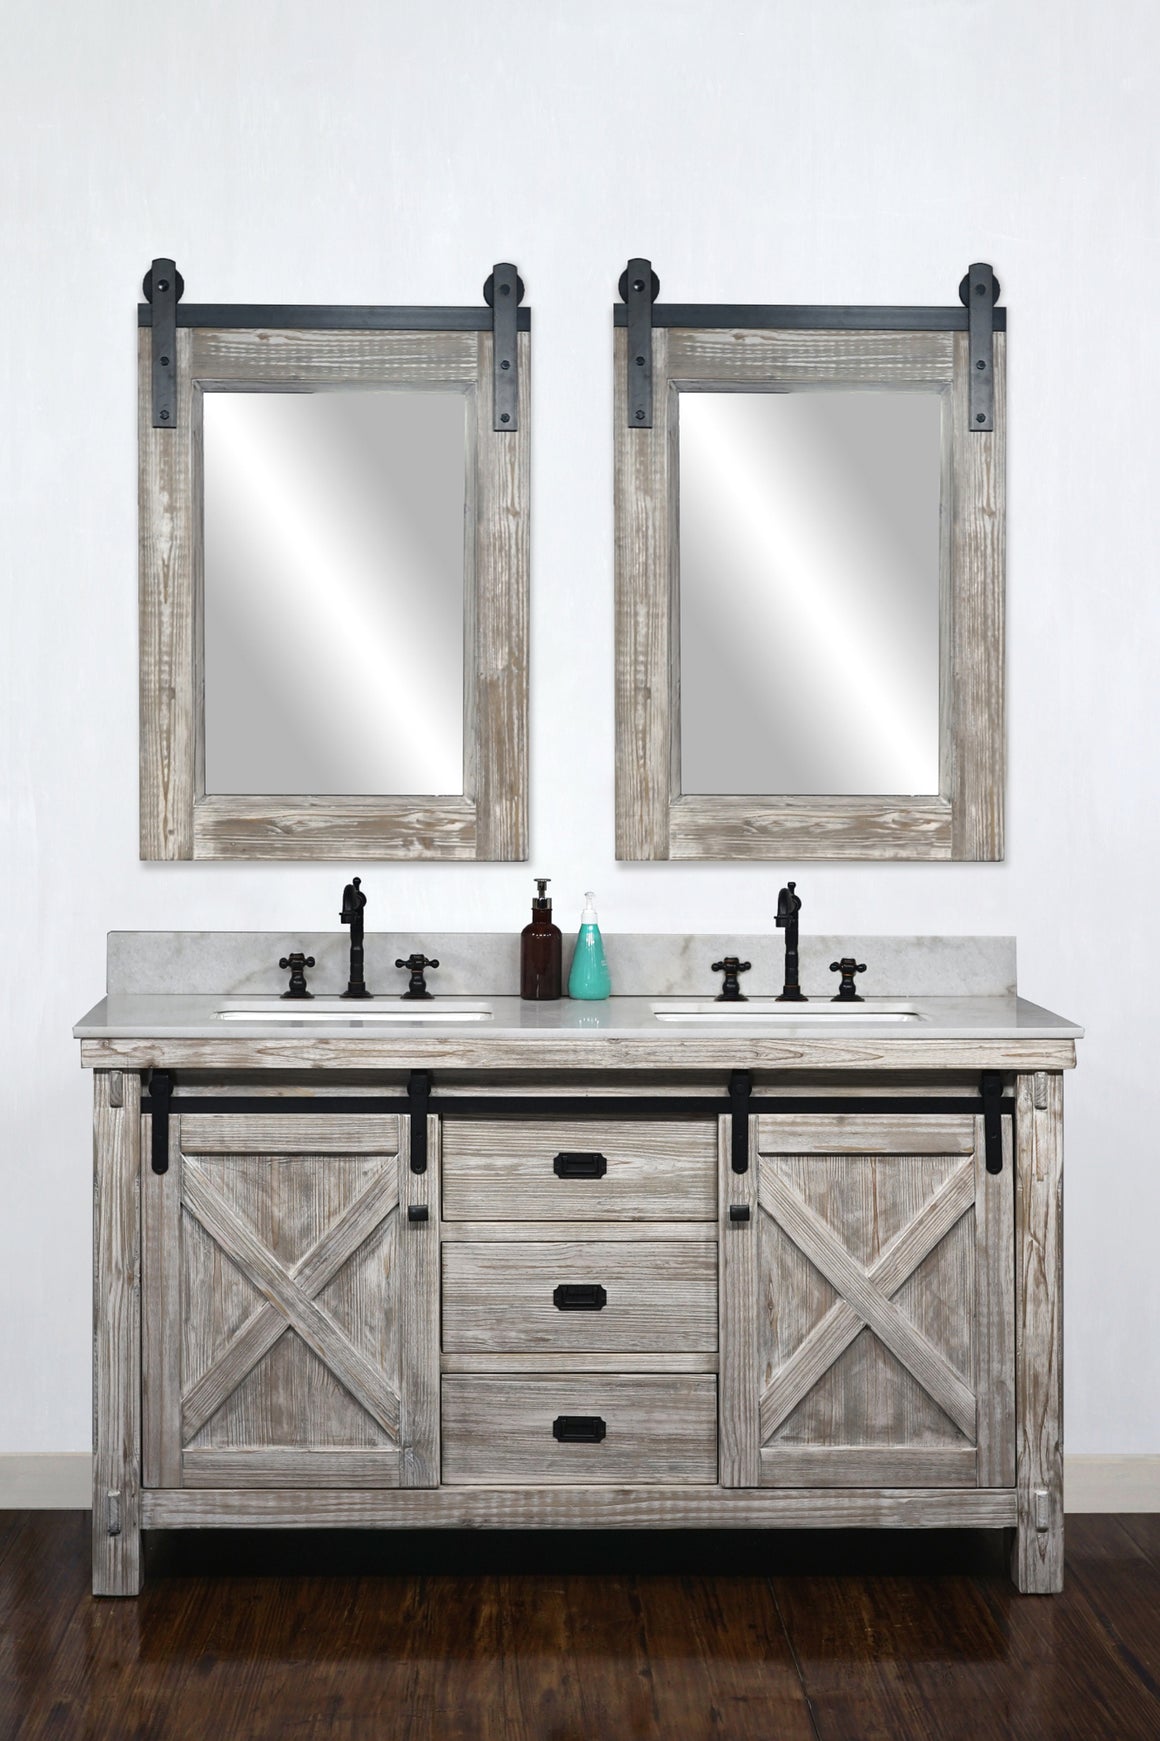 60"RUSTIC SOLID FIR BARN DOOR STYLE DOUBLE SINKS VANITY IN WHITE WASH WITH ARCTIC PEARL  QUARTZ MARBLE TOP-NO FAUCET